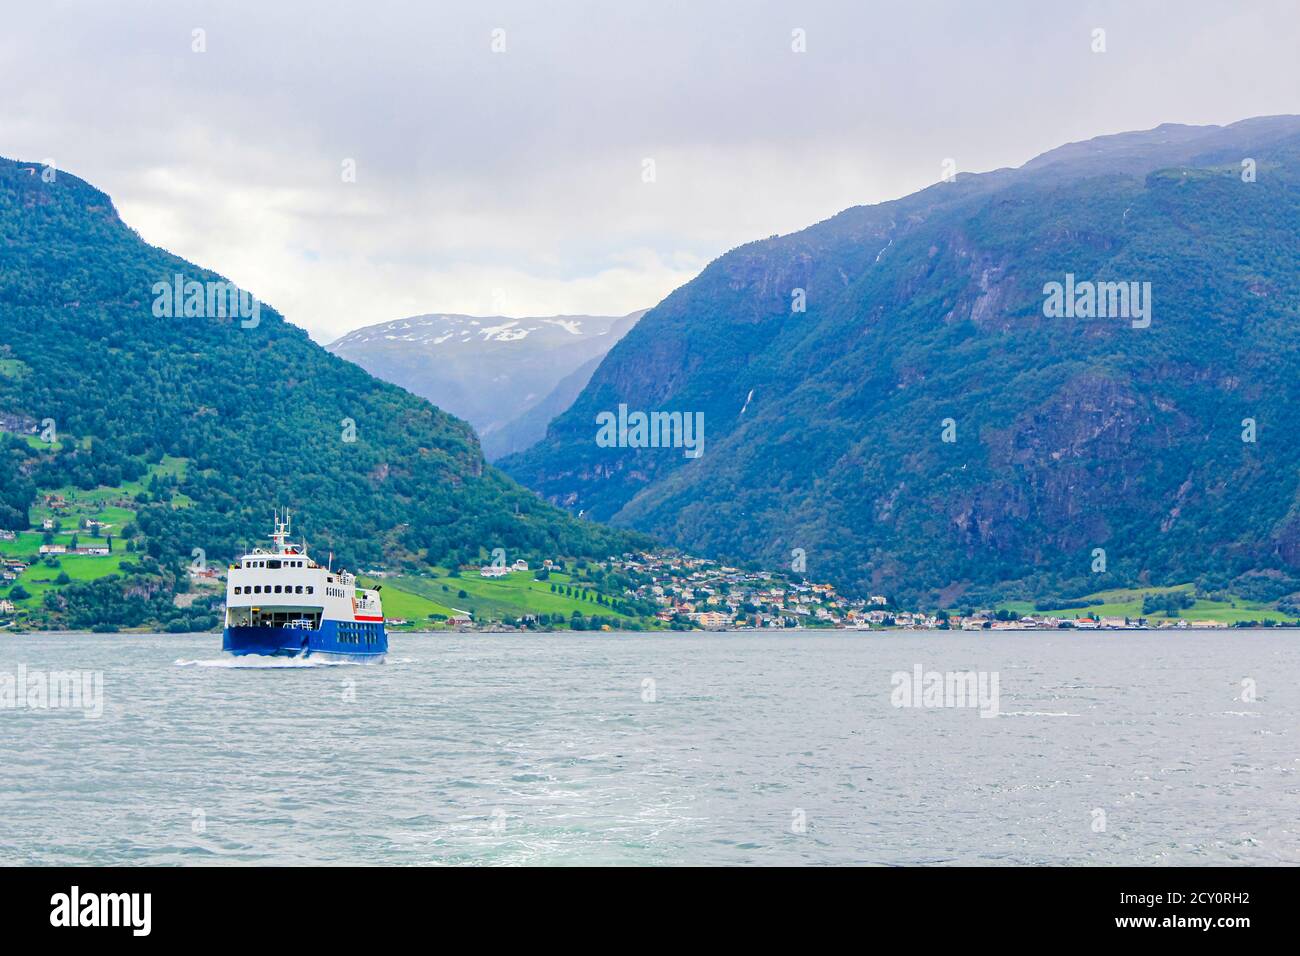 Boat trip and holiday ferry in beautiful Aurlandsfjord Aurland Vestland Sognefjord in Norway. Stock Photo